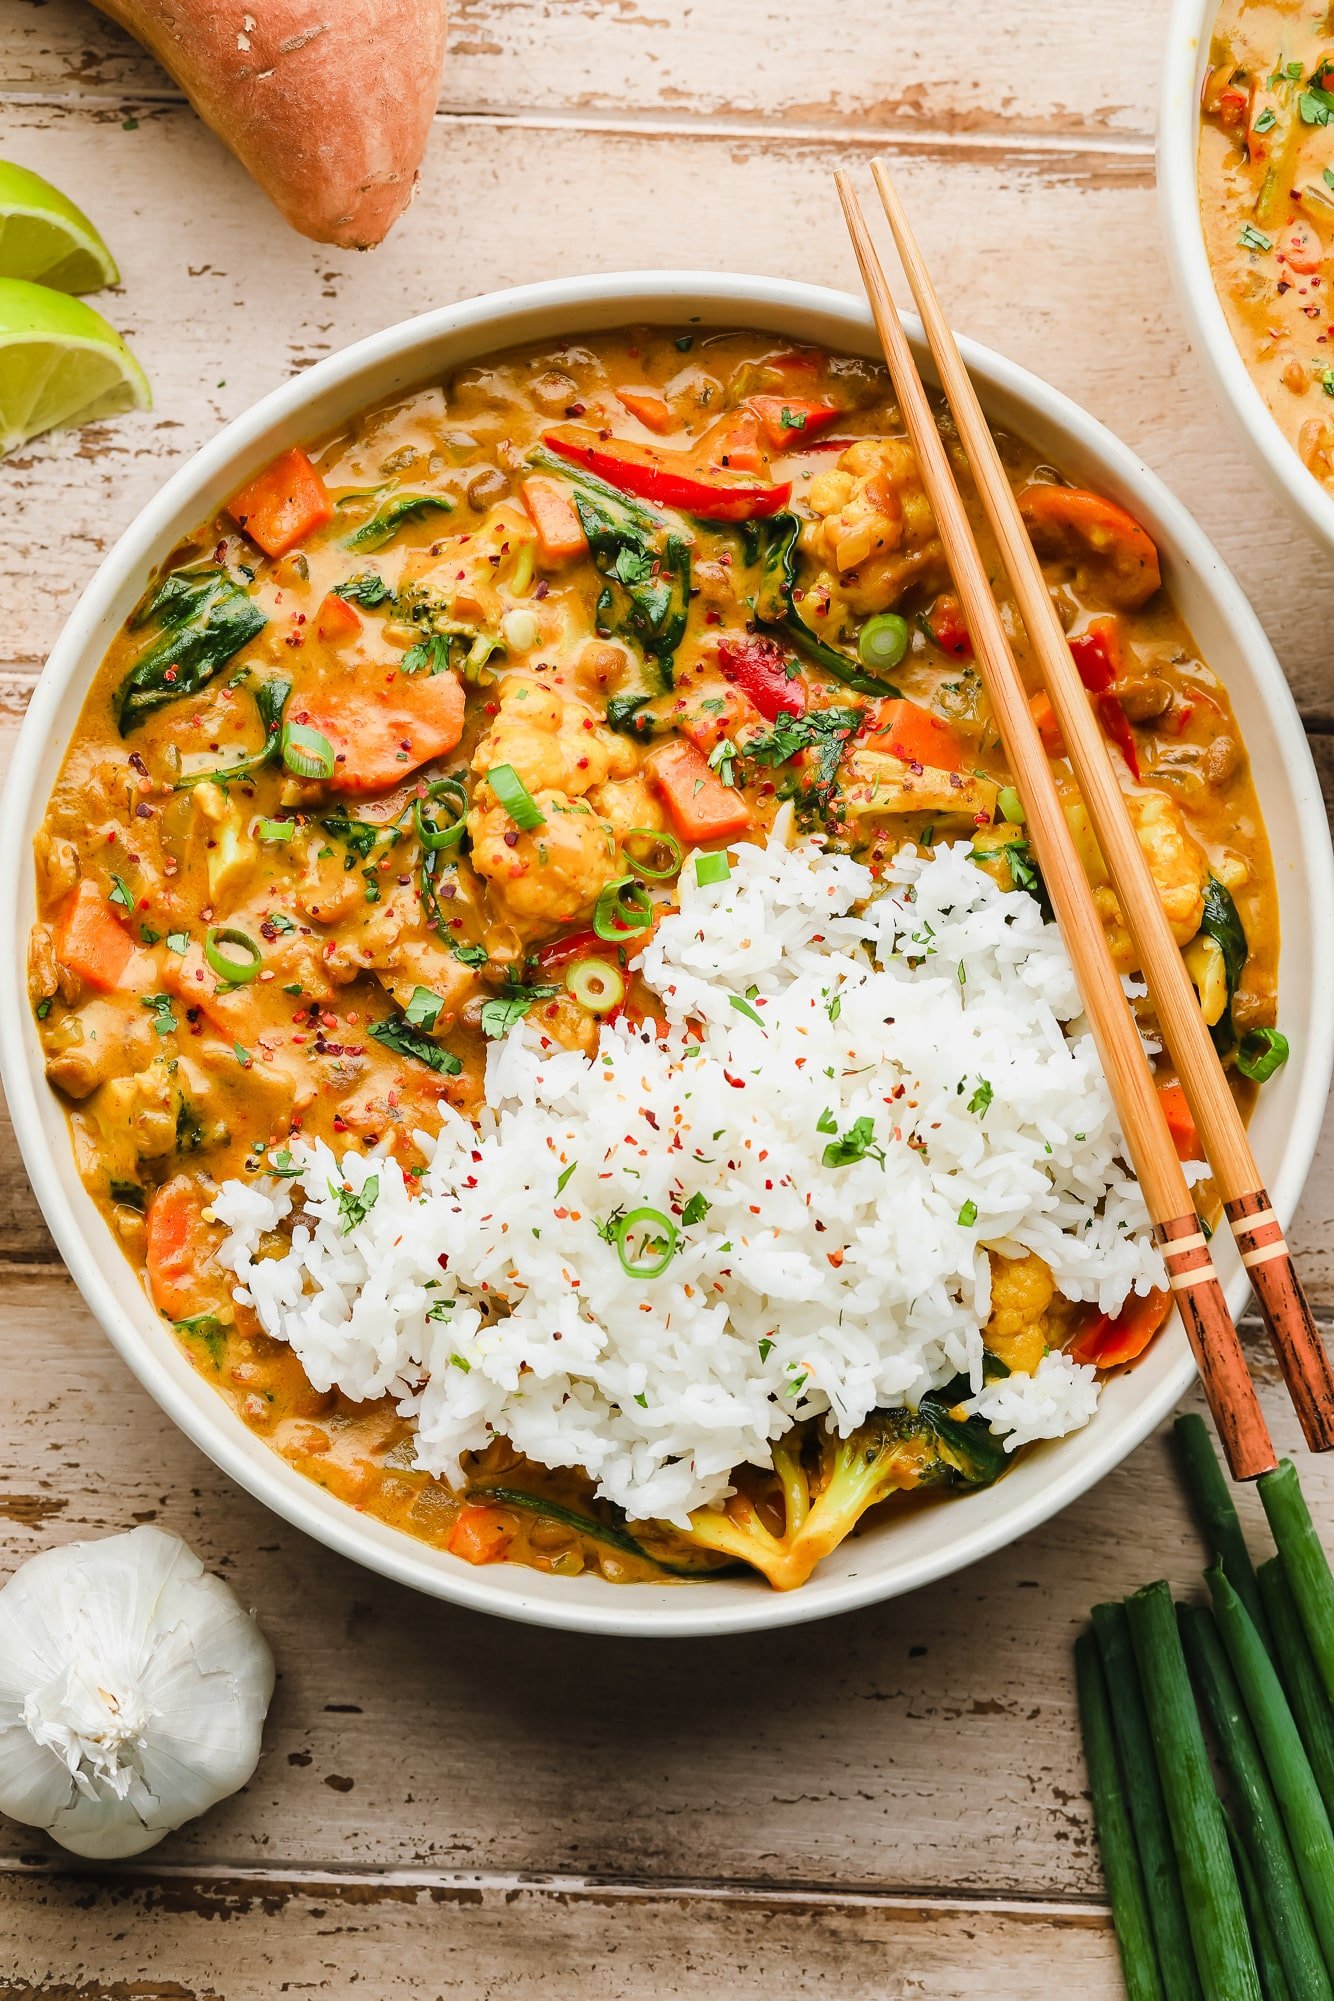 A white bowl filled with vegan curry and basmati rice. Wooden chopsticks sit on top of the bowl.